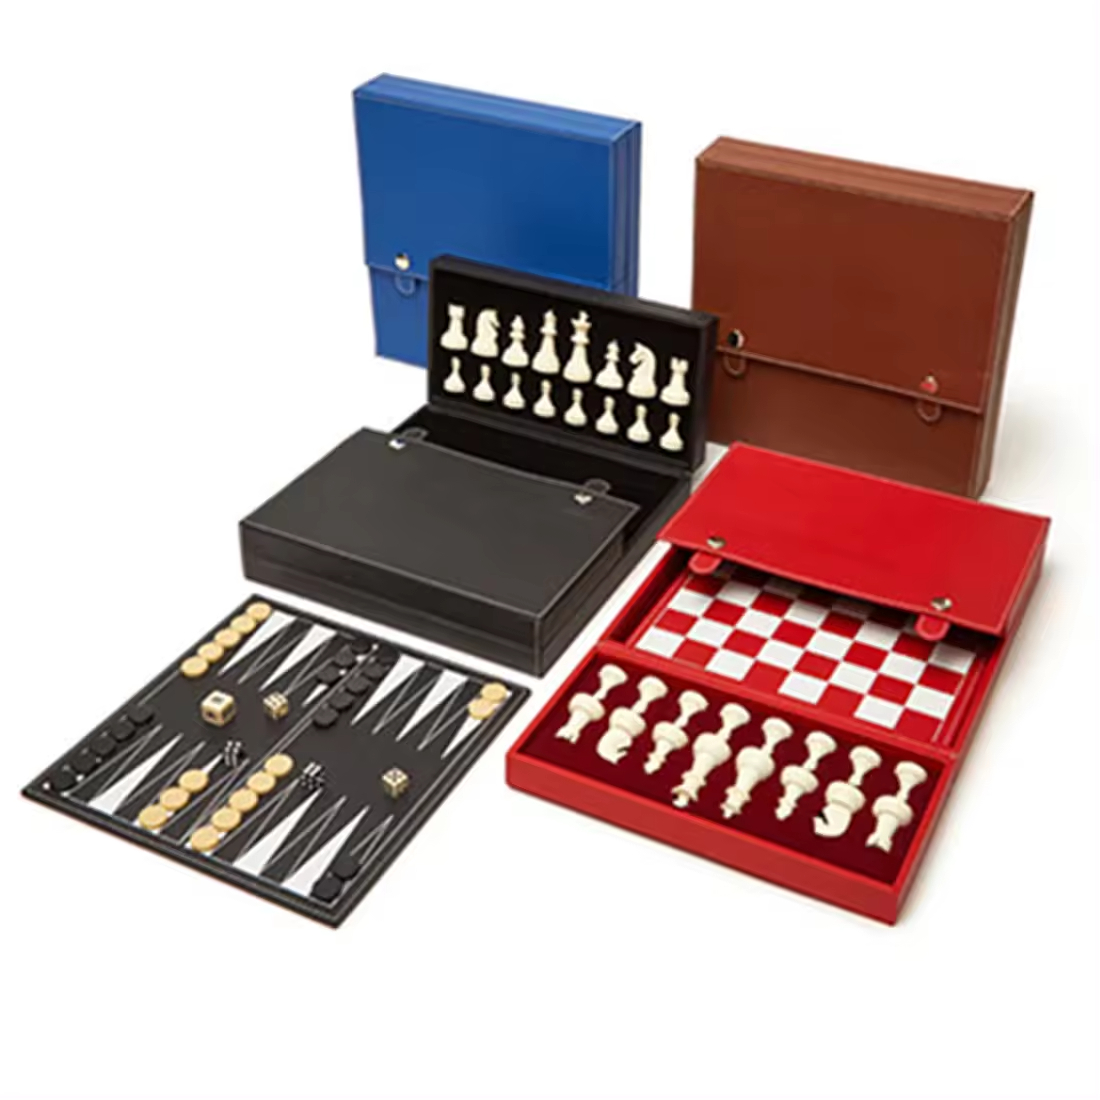 Leather Travel Backgammon Indoor Outdoor Board Game Set Night Time Family Entertainment Chess Games